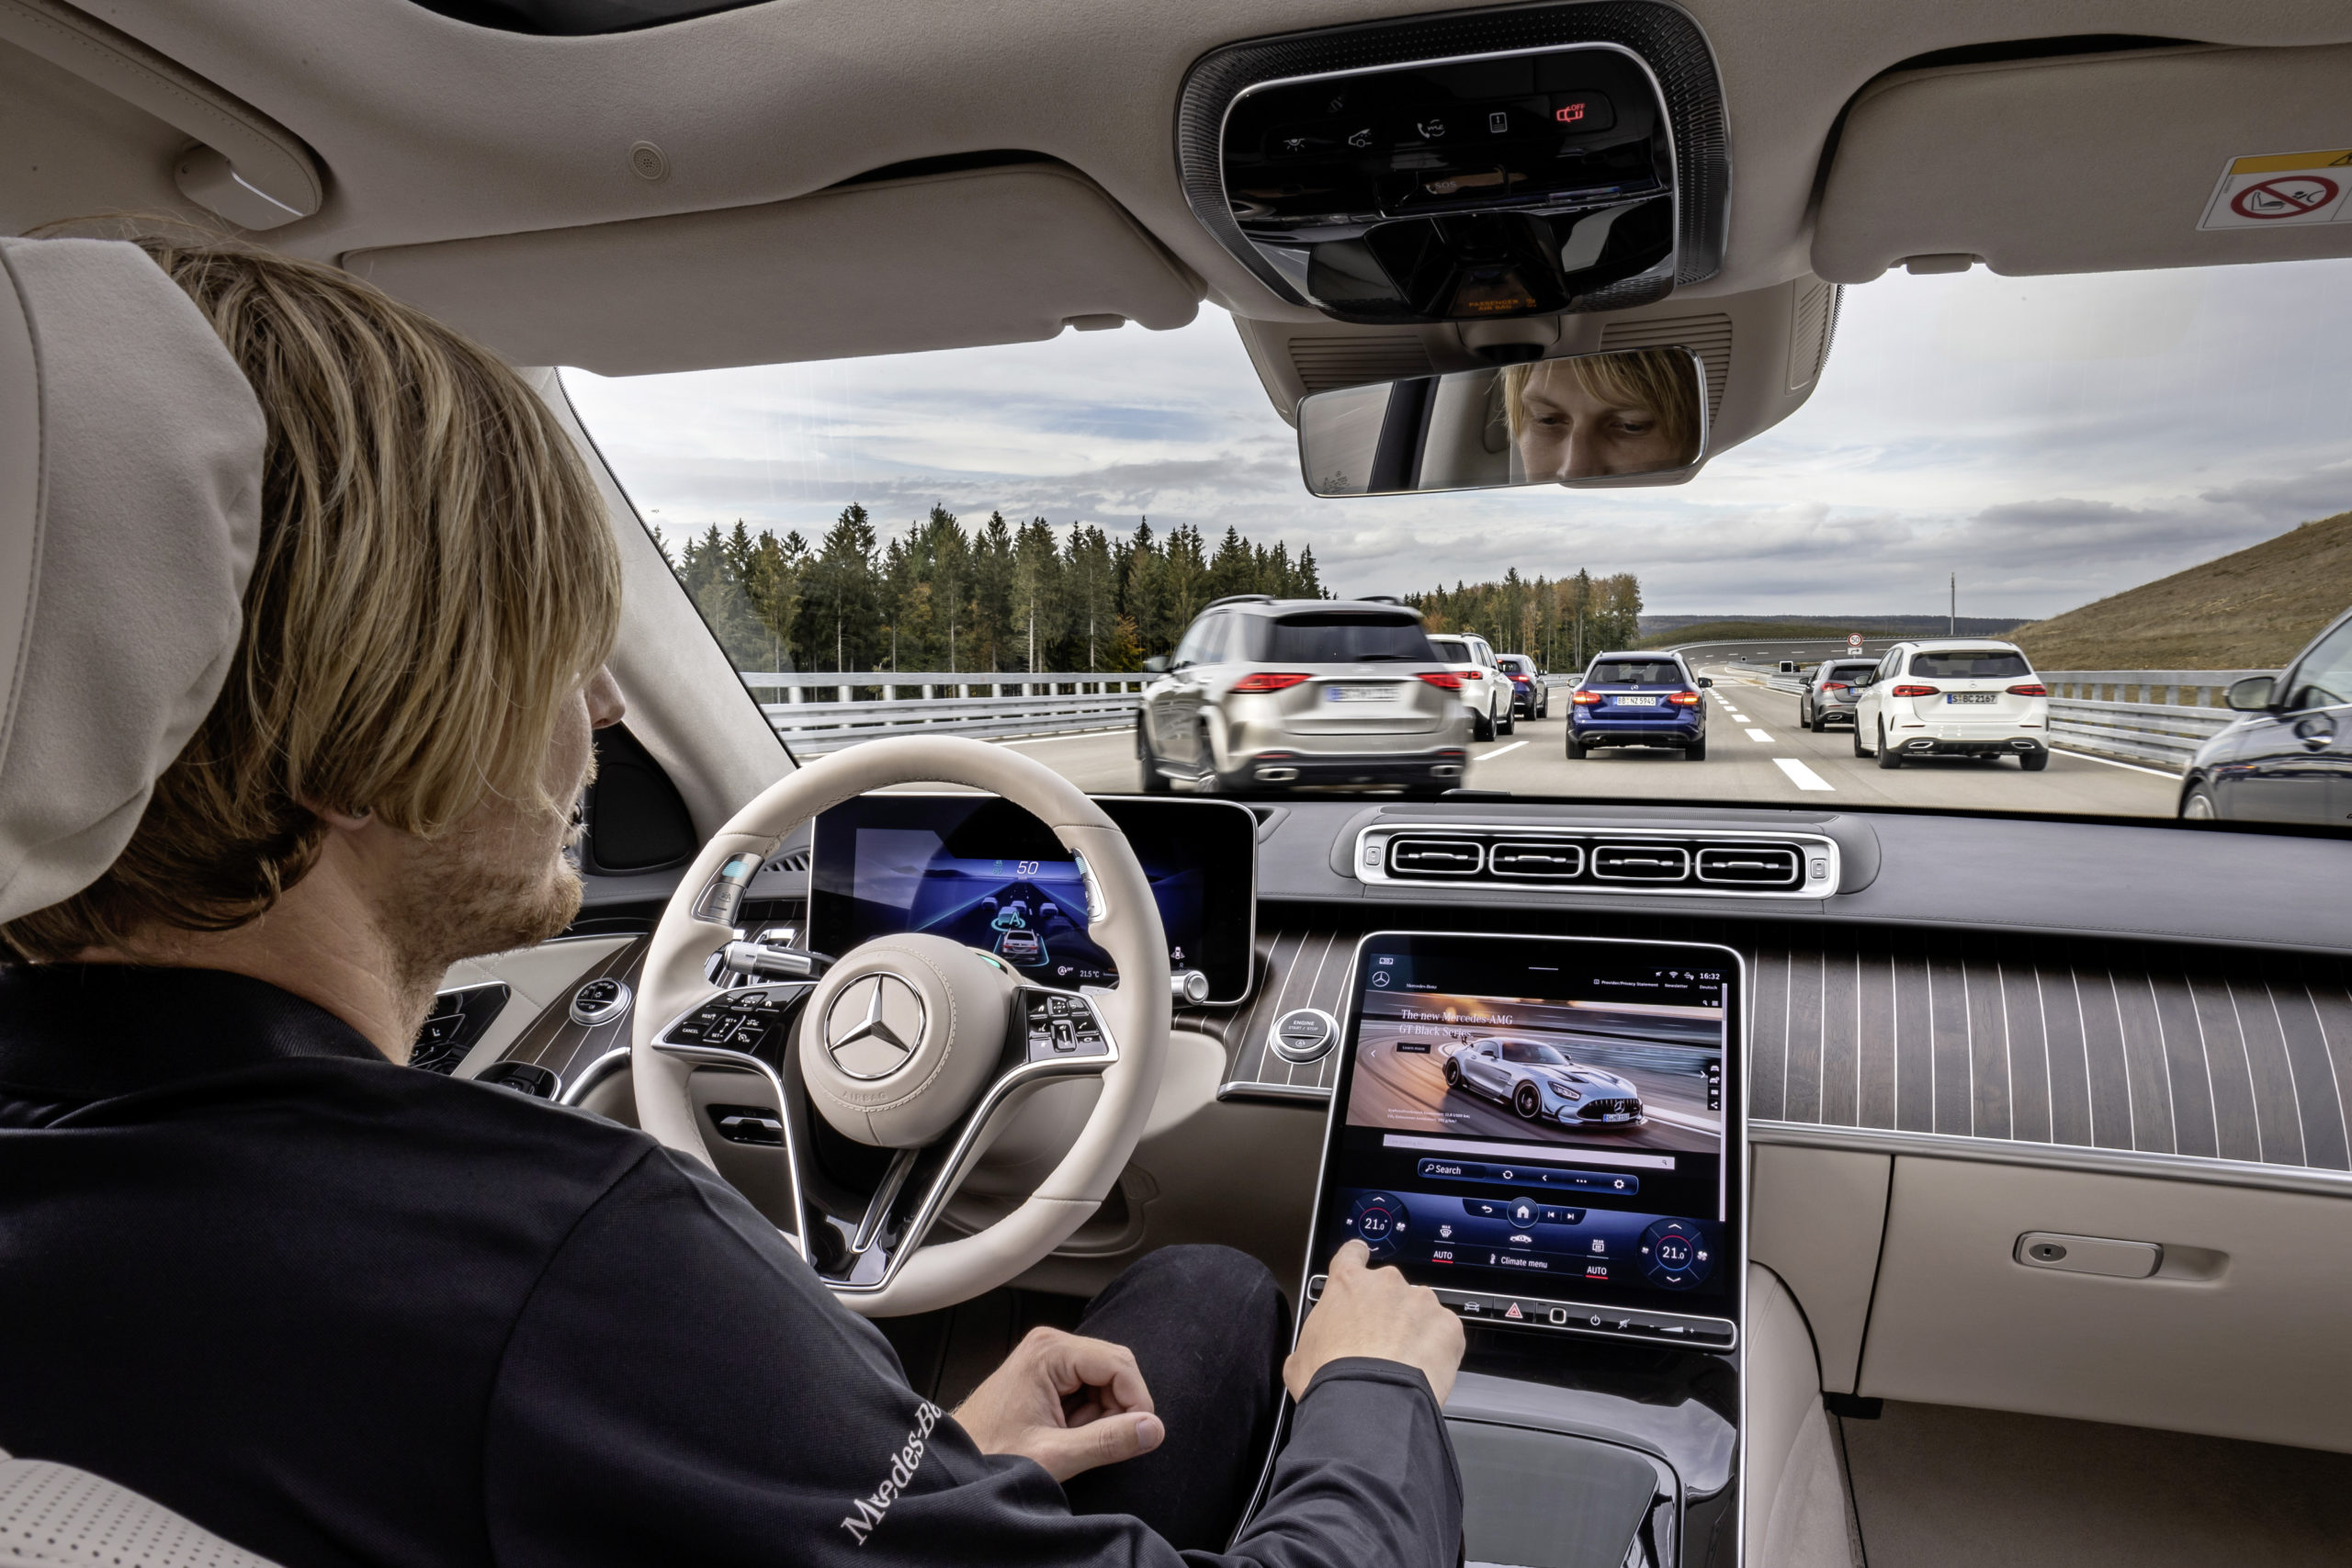 Mercedes gets approval for Level 3 autonomous driving in US